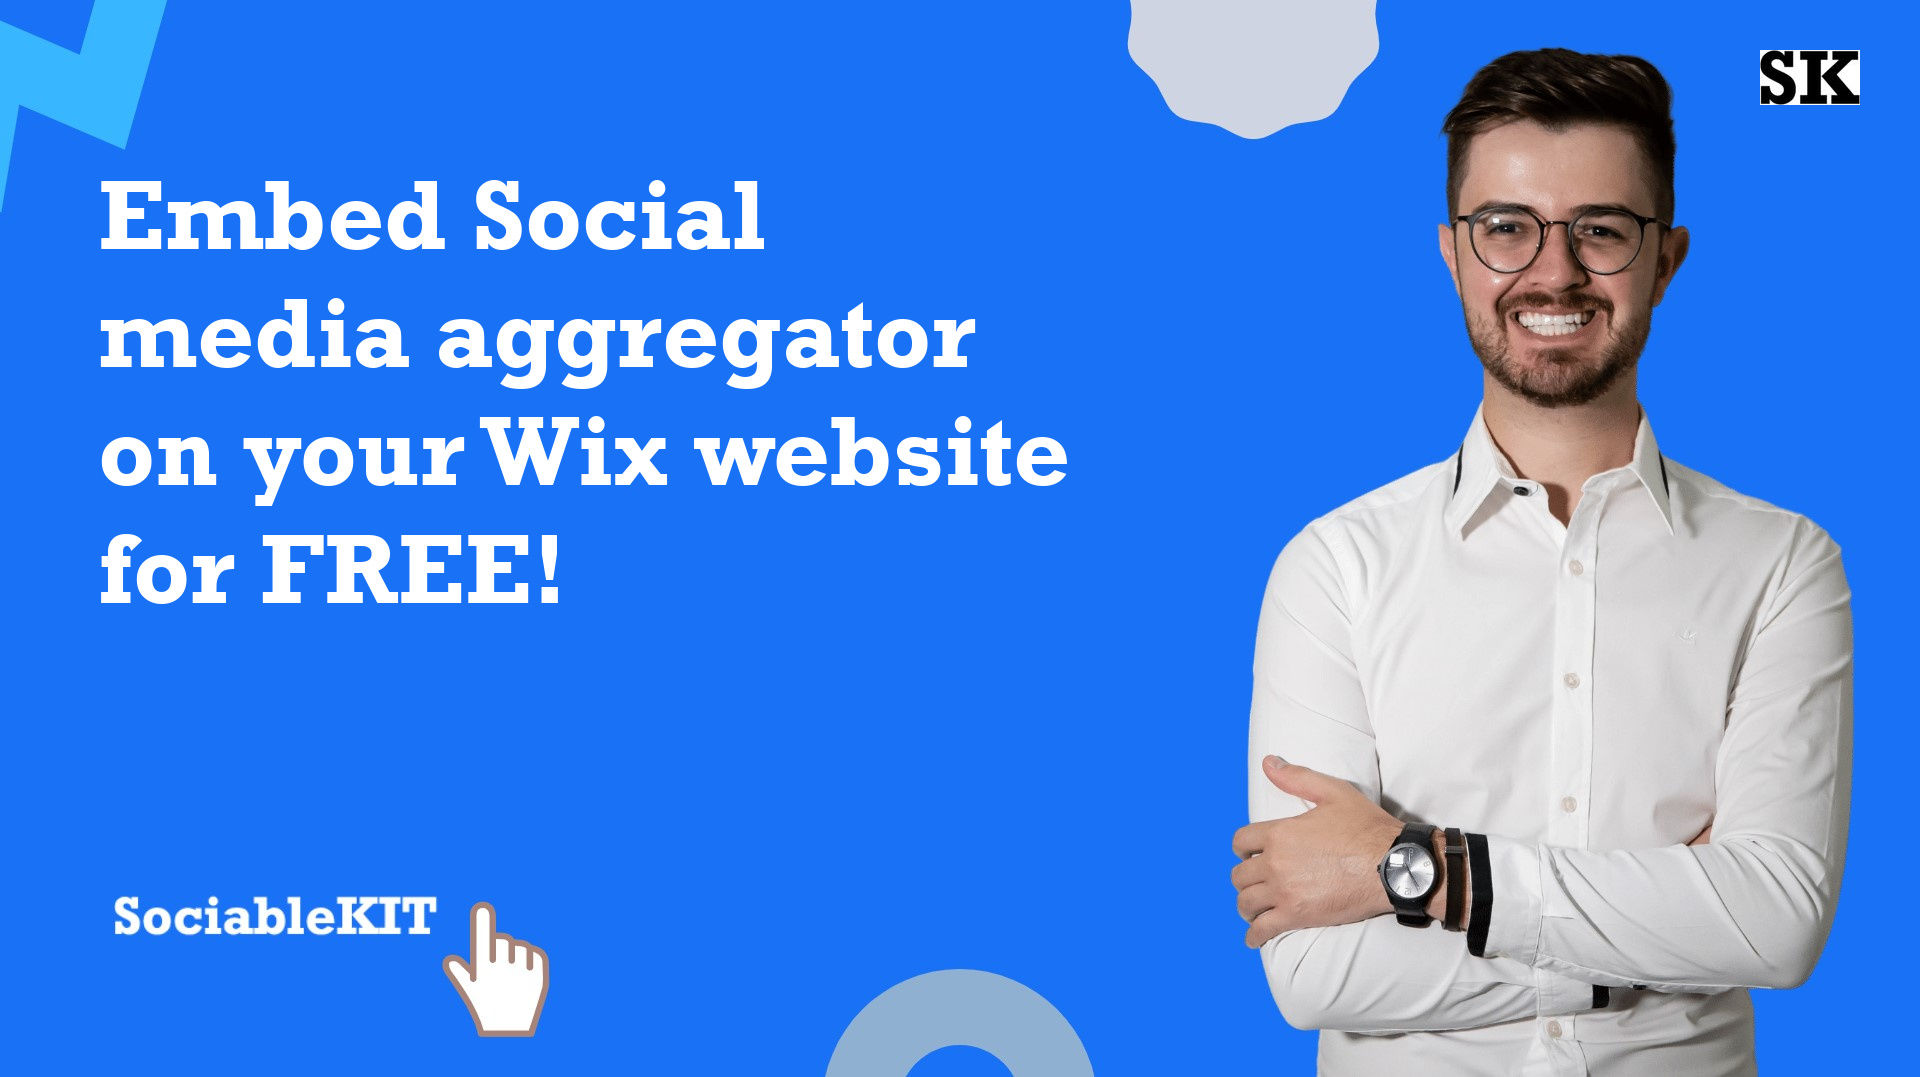 How to embed Social media aggregator on your Wix website for FREE?